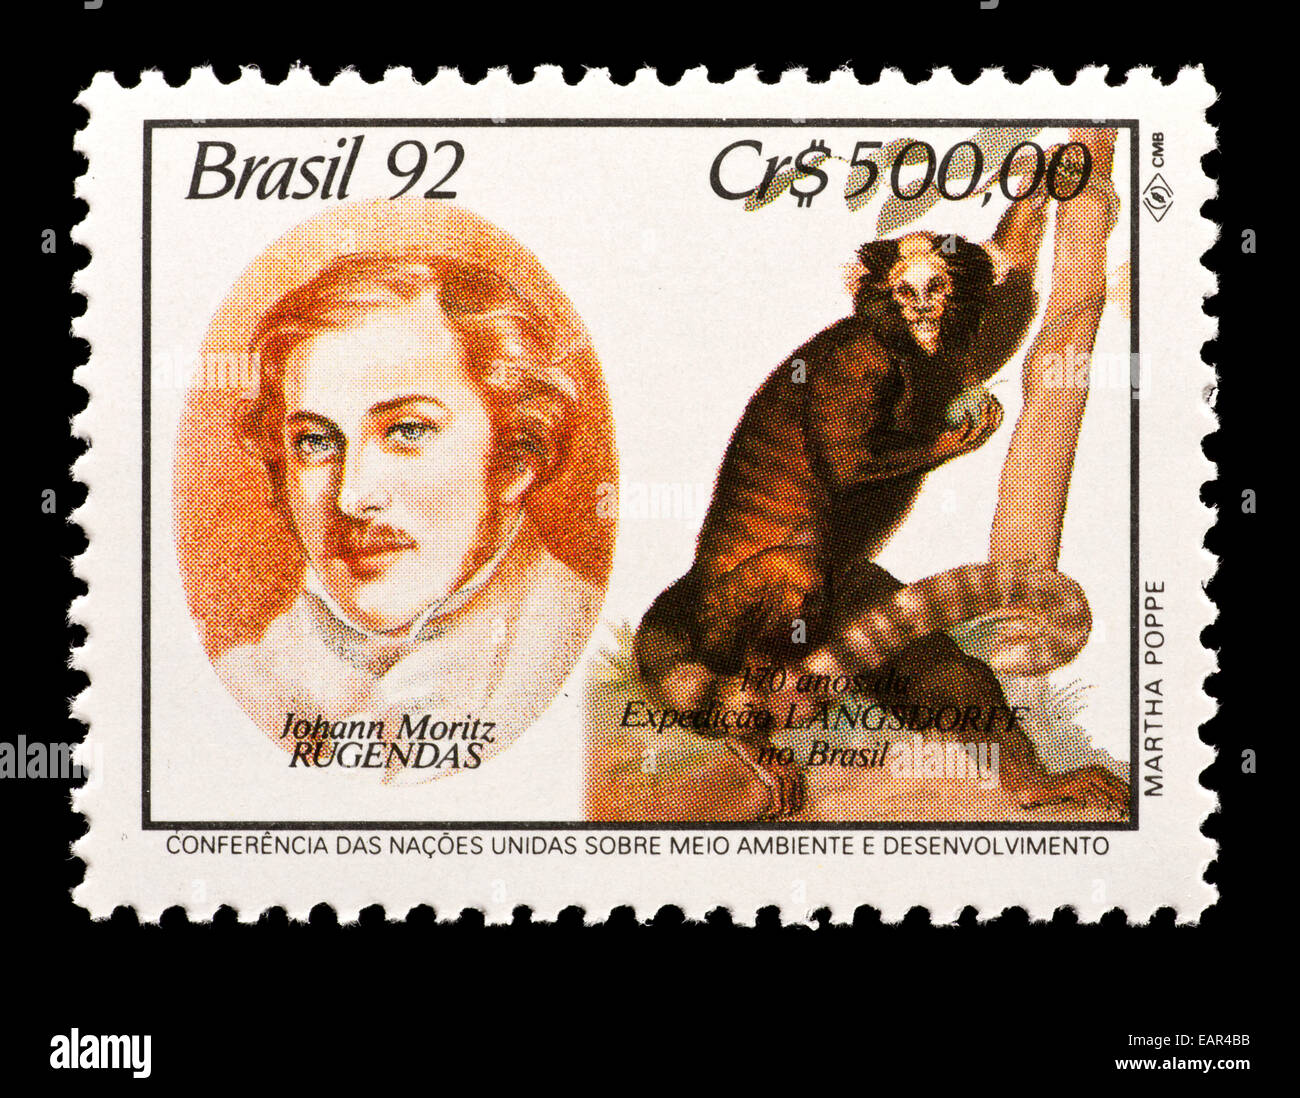 Postage stamp from Brazil depicting Johann Moritz Rugendas and a monkey. Stock Photo